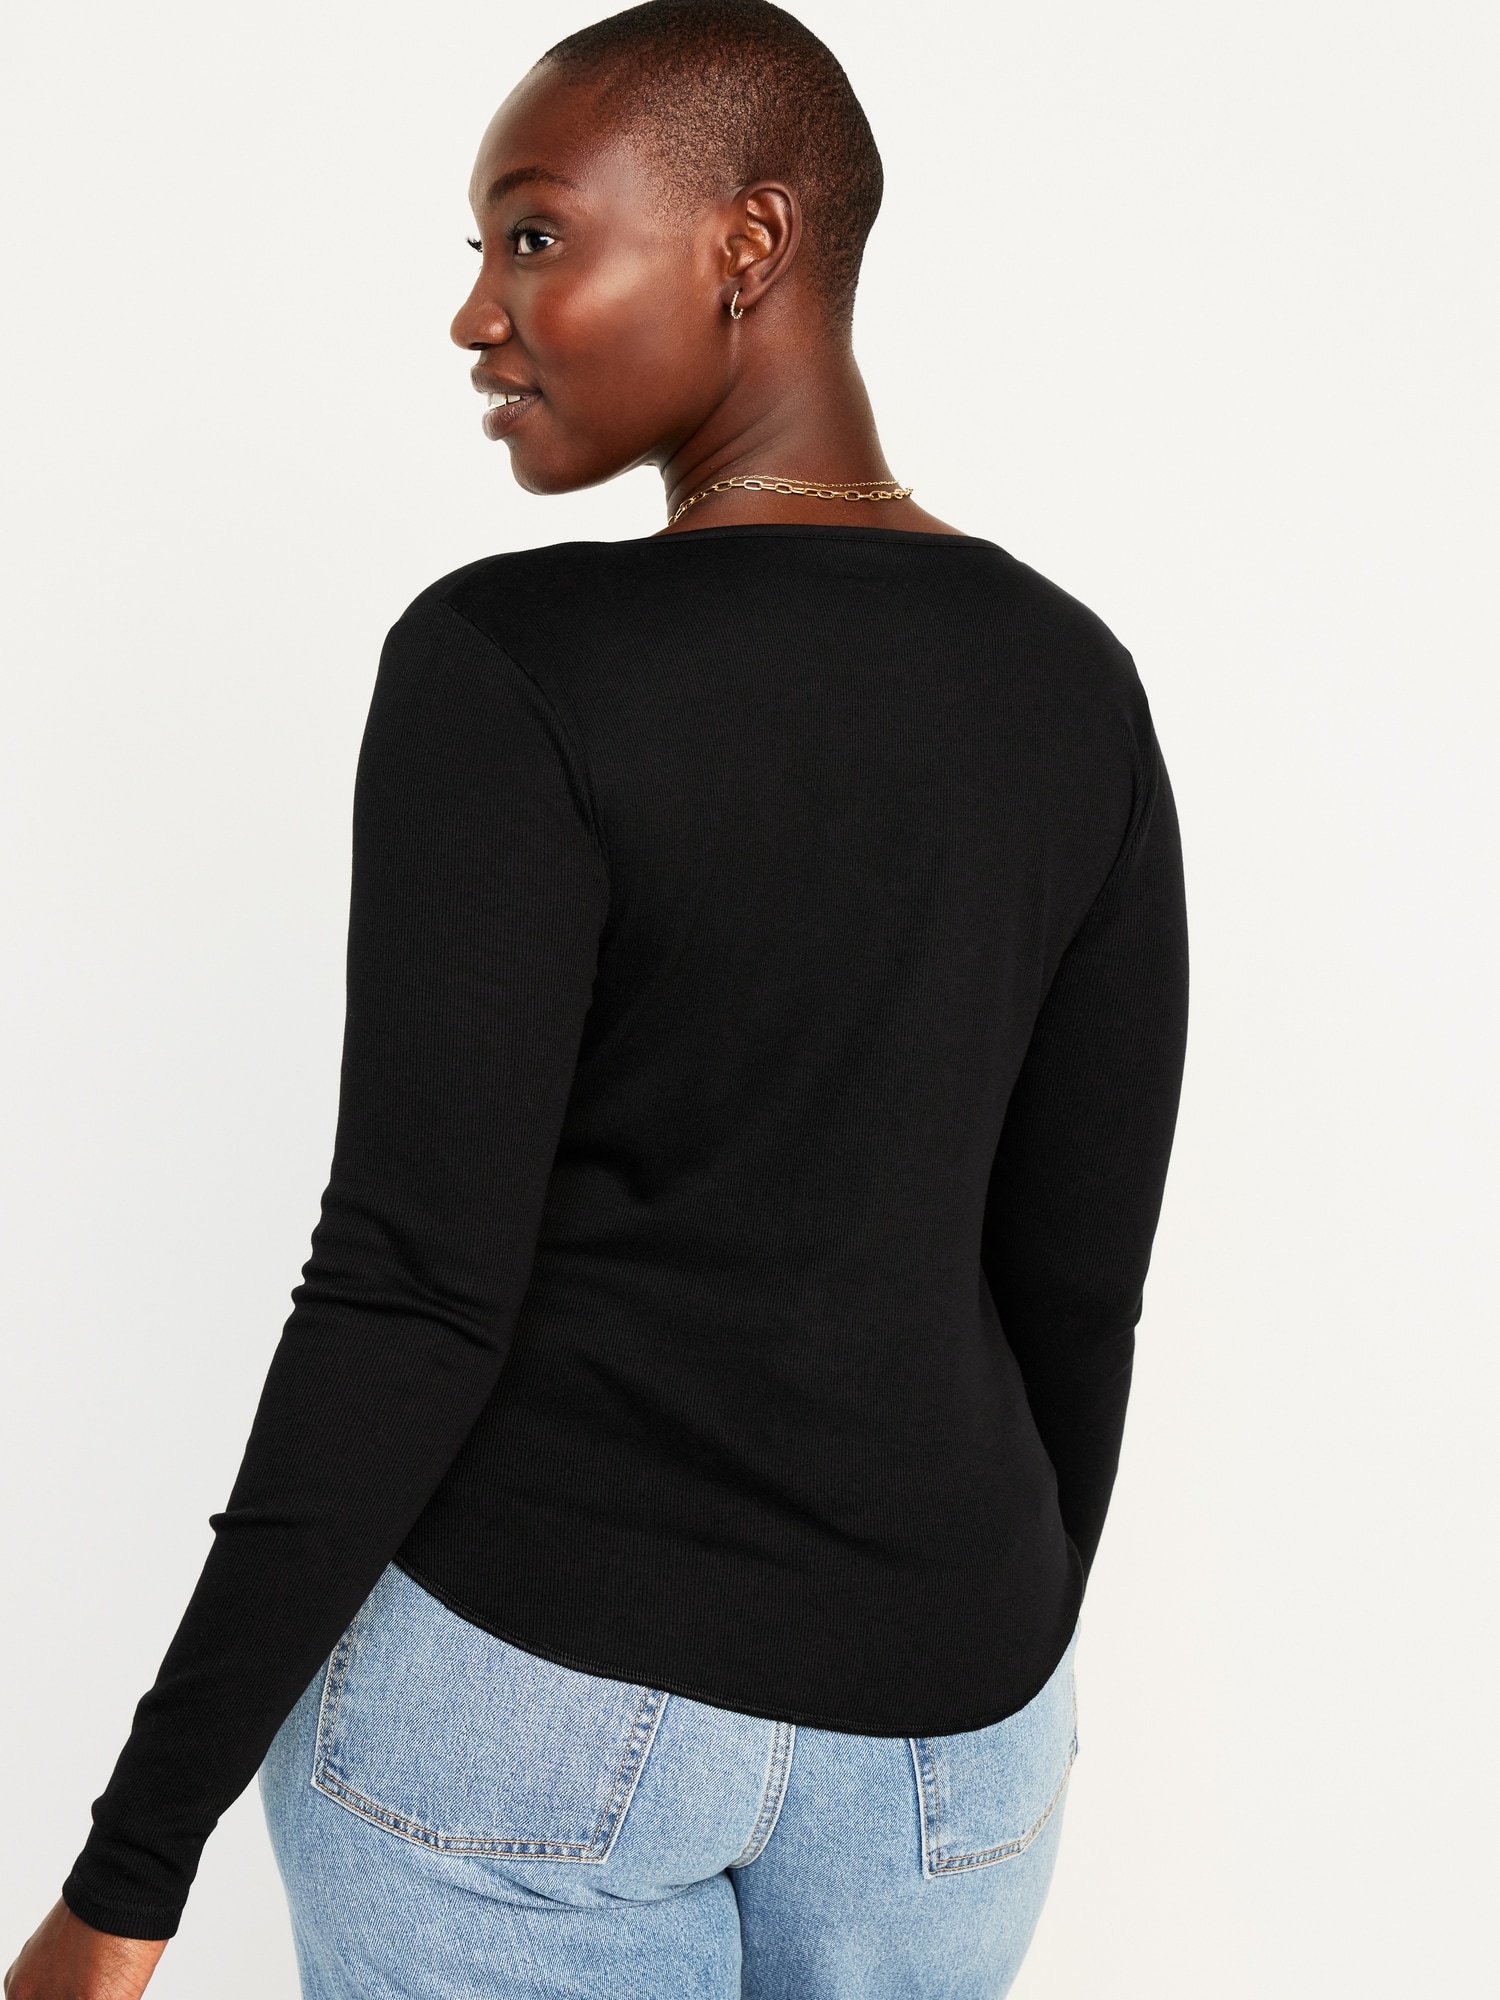 for T-Shirt Old | Navy Women Fitted Rib-Knit Long-Sleeve